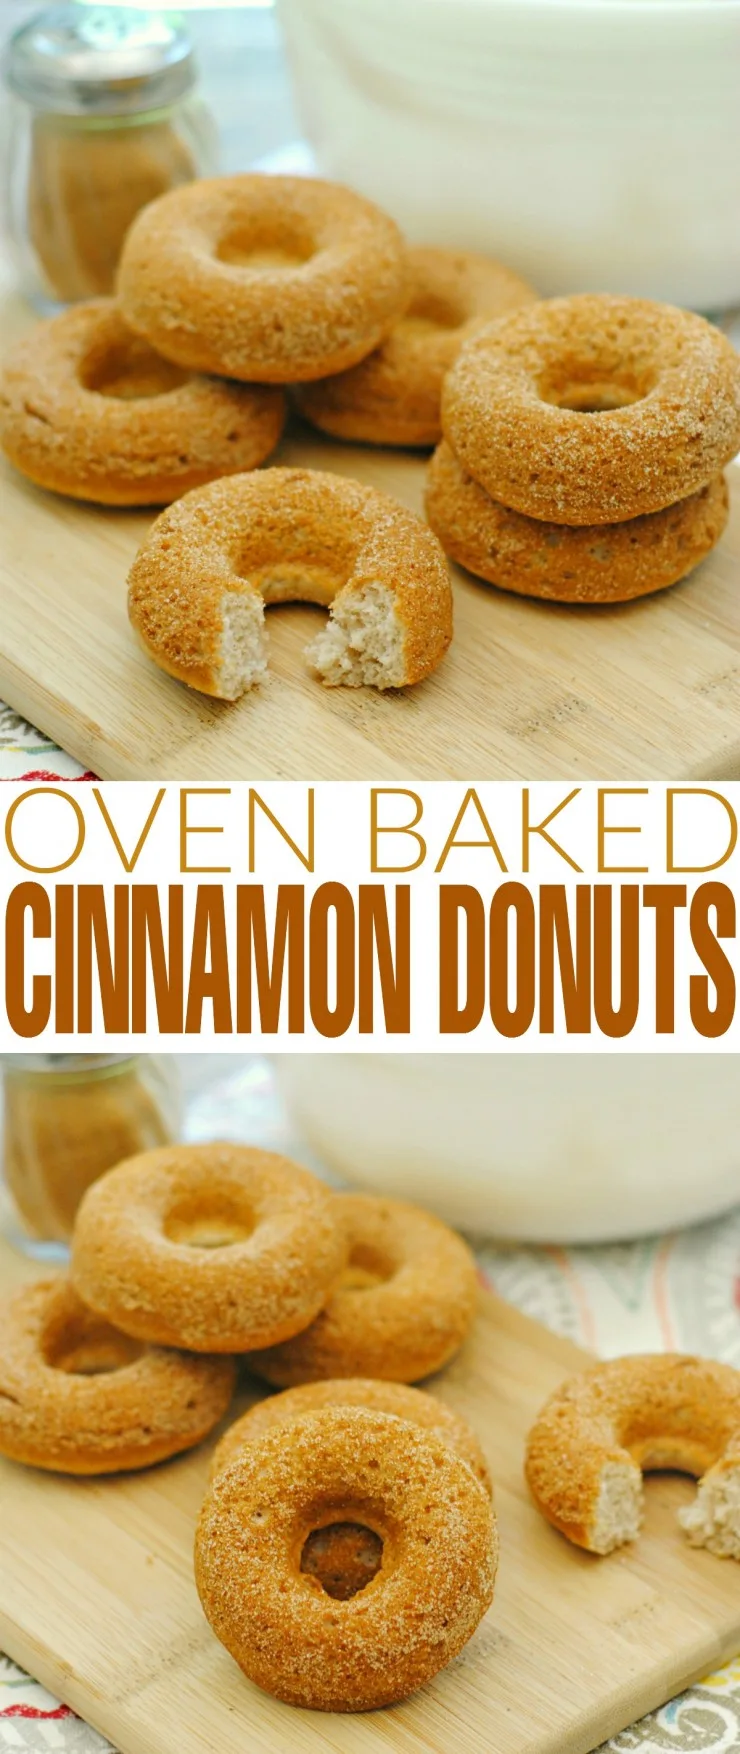 If you too love cinnamon donuts you are going to simply love these oven baked cinnamon donuts.  Soft, fluffy and bursting with the warming combination of cinnamon and sugar.